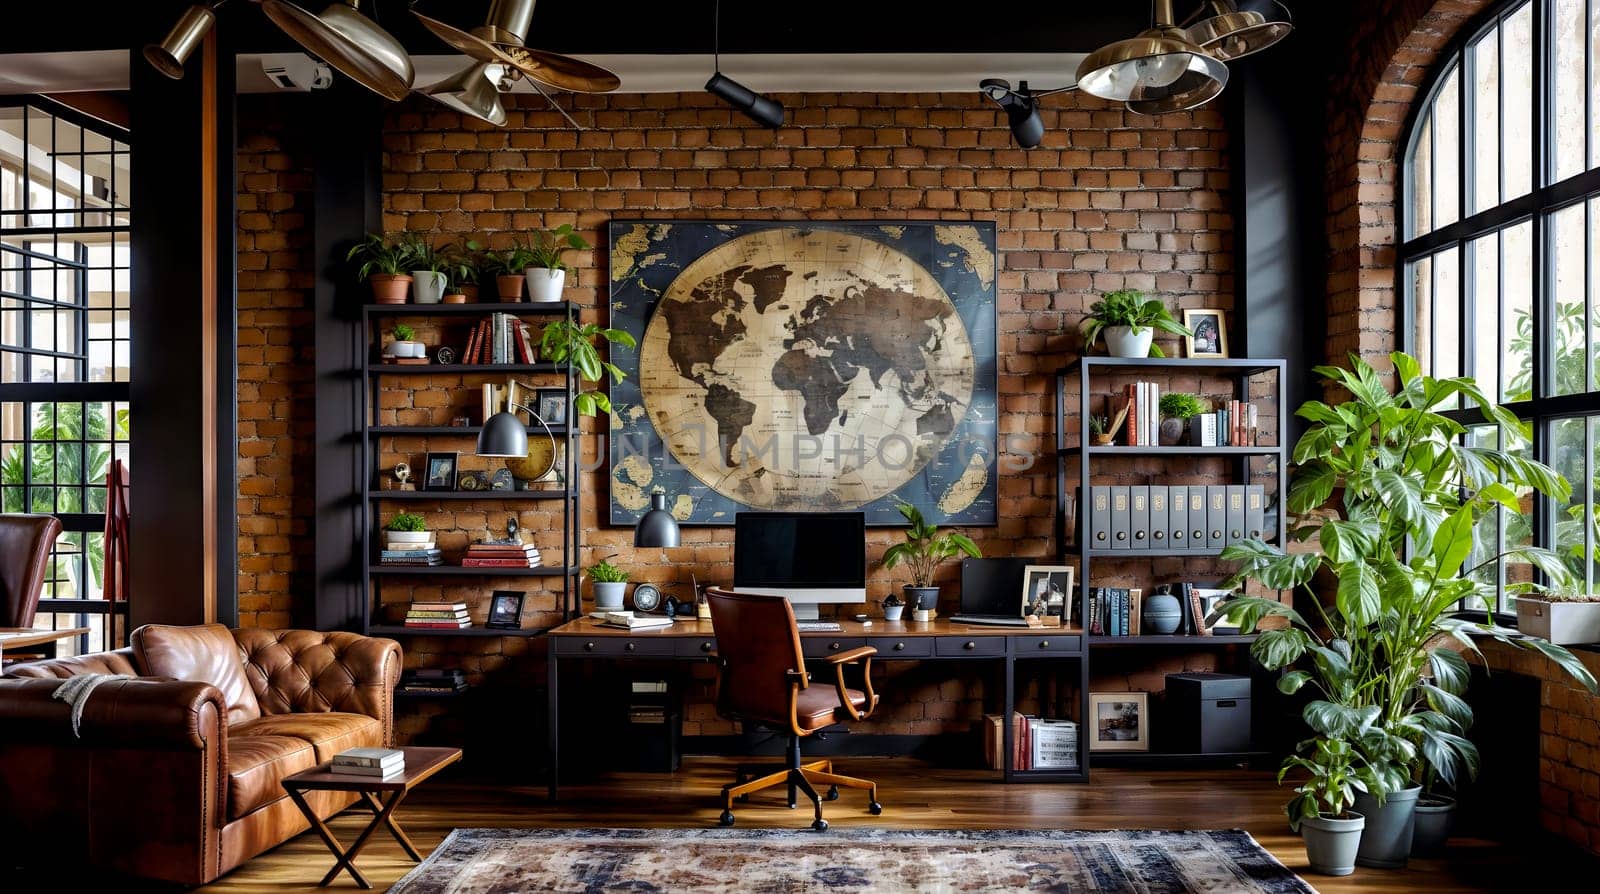 Stylish industrial Home Office With Exposed Brick and Designer Furniture by chrisroll